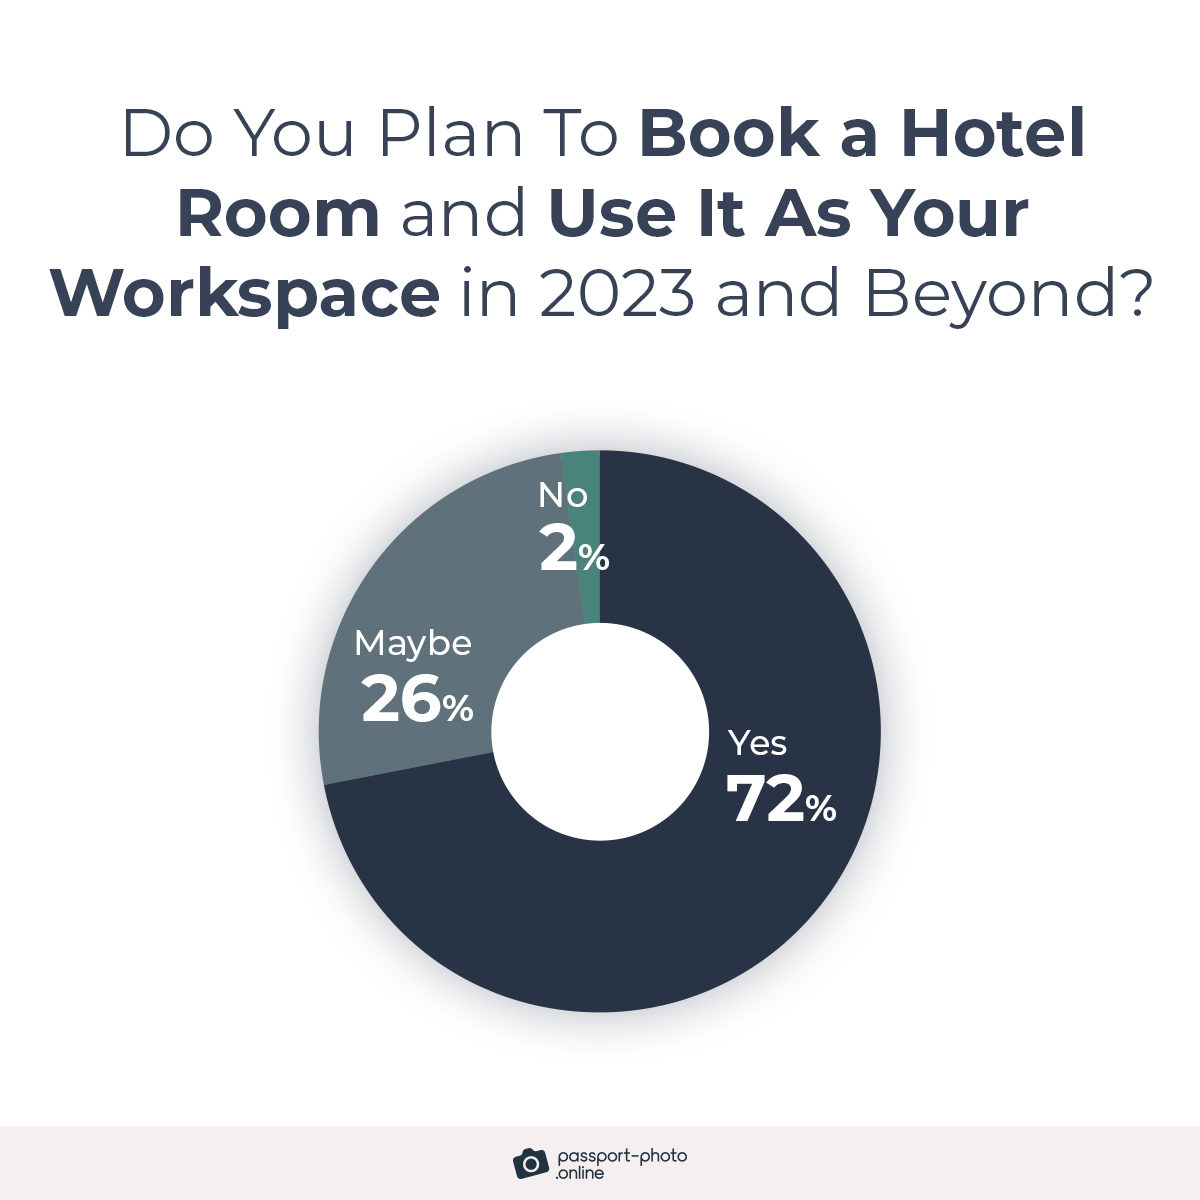 72% of working professionals plan to book hotel rooms with the intention of using them as their workspace in 2023 and beyond